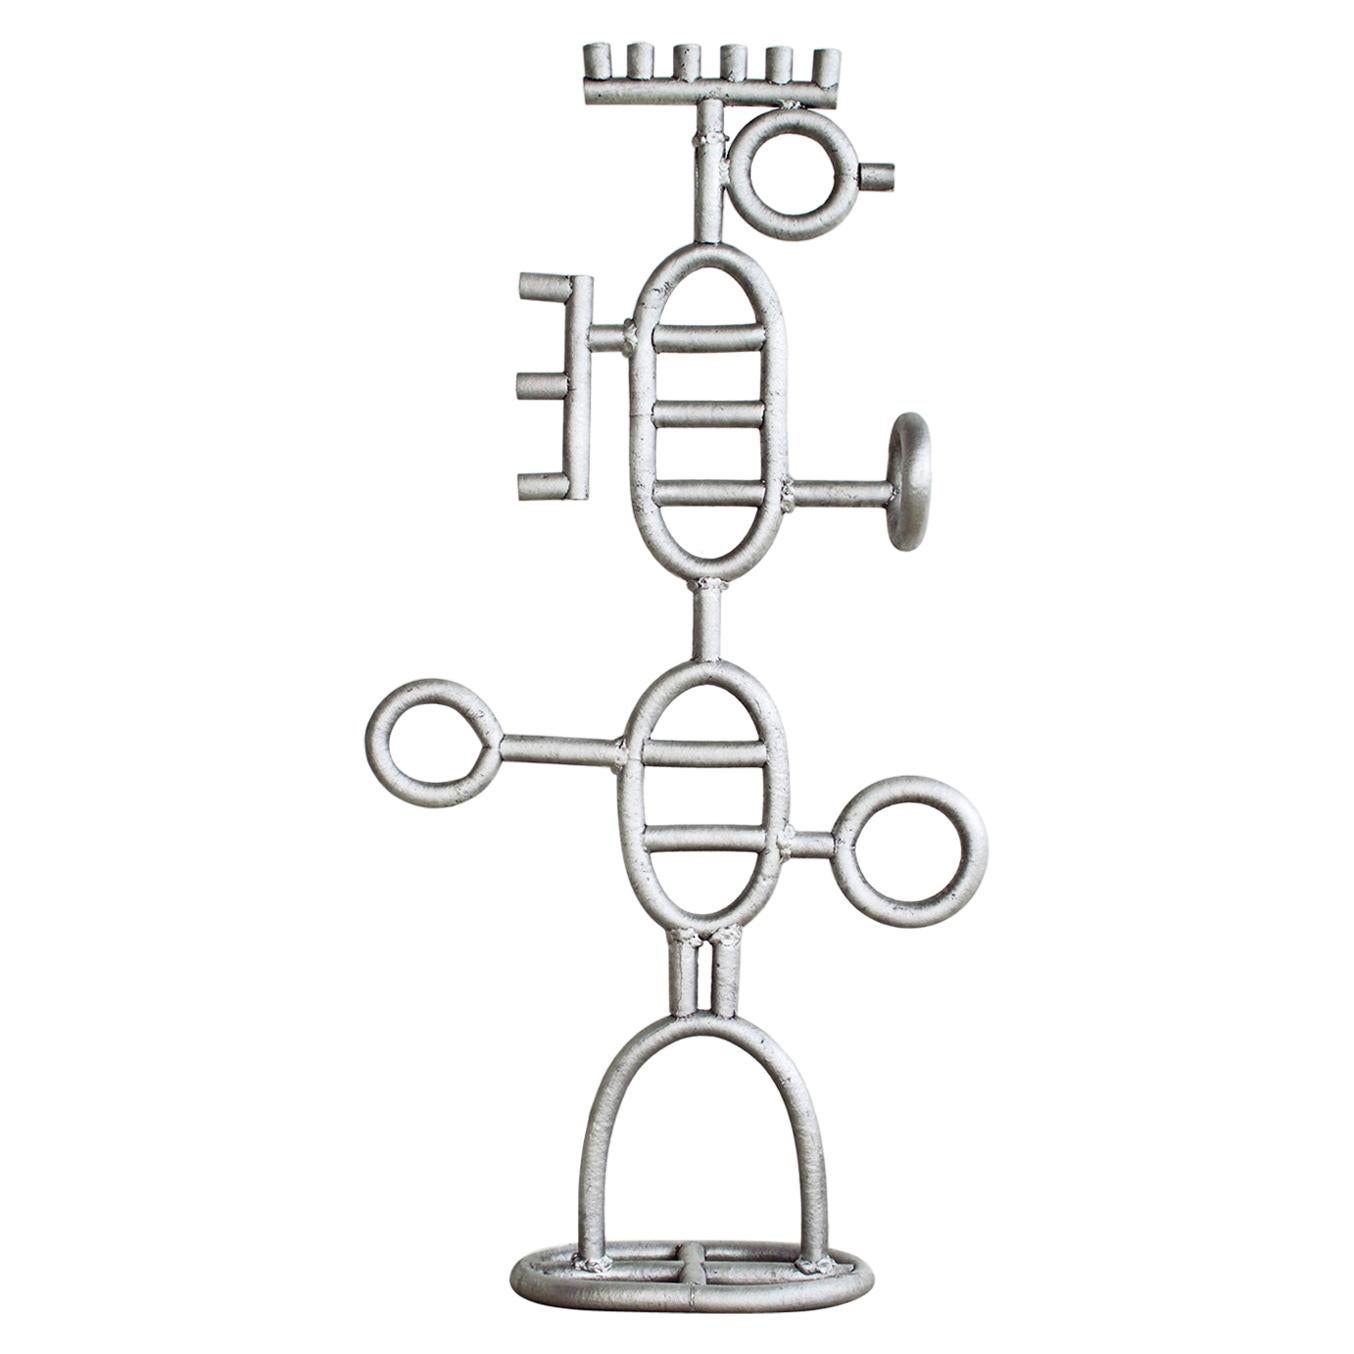 Sigve Knutson Cast Aluminium Hanger, Manufactured by Sigve Knutson Oslo, 2019 For Sale